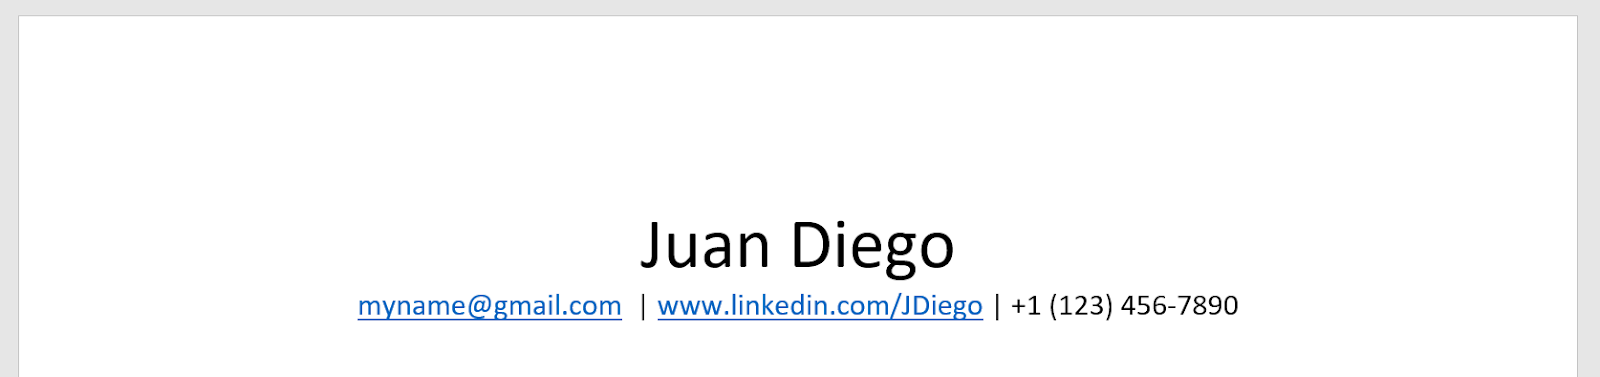 This is an image of an example Resume header. The name is centered in the page, and is a larger size than the rest of the typed font. The line underneath the header is centered as well. This line is divided into three, and it contains the person's email, linkedin link, and phone number.